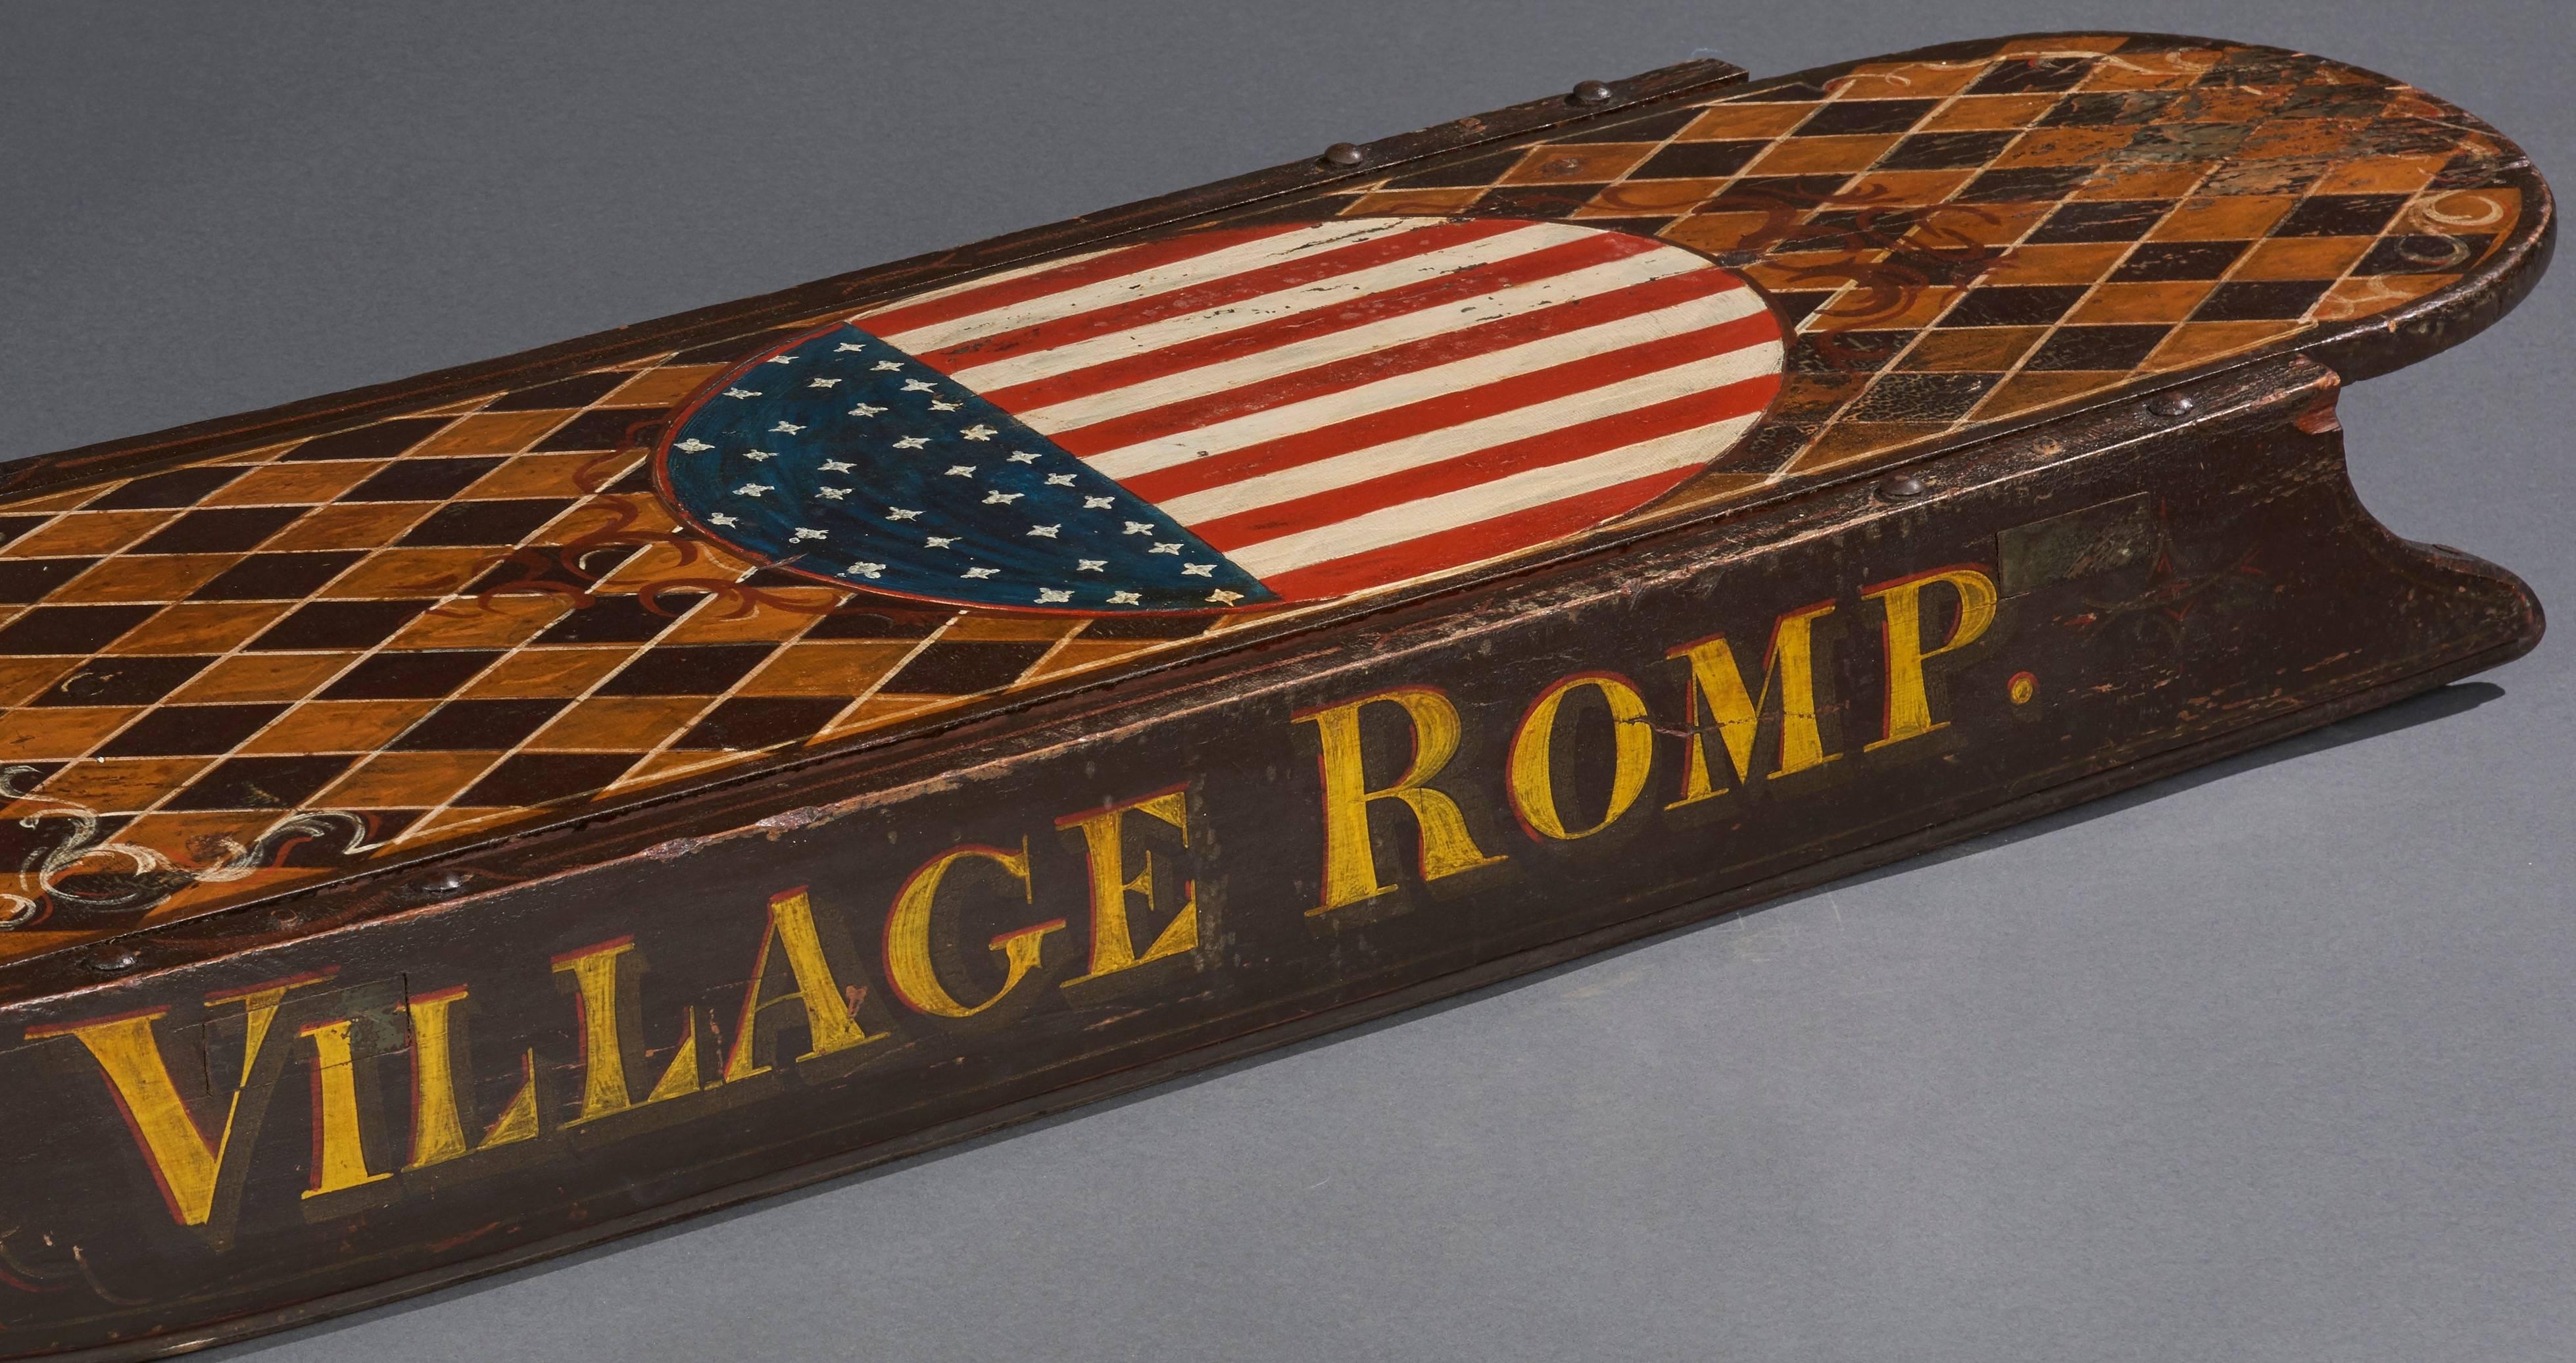 Yankee clipper type sled christened village romp with outstanding paint from New England, circa 1880. Graphically pleasing American shield on a checkerboard background. Metal stand for upright display available.